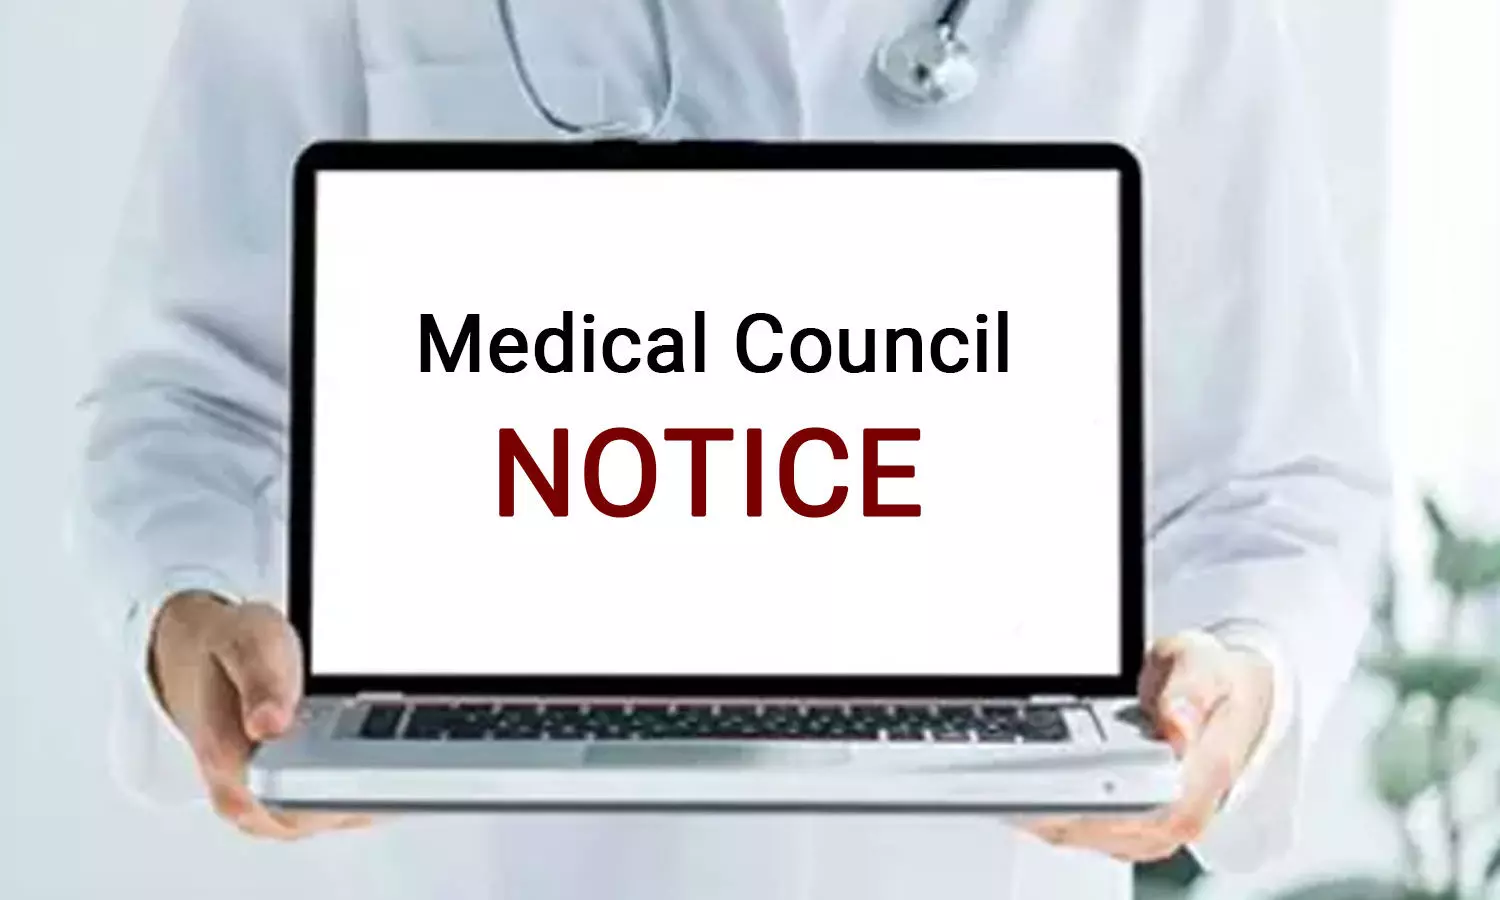 Those completing MBBS degree, internship via online mode not eligible for medical council registration: TN medical council tells FMGs